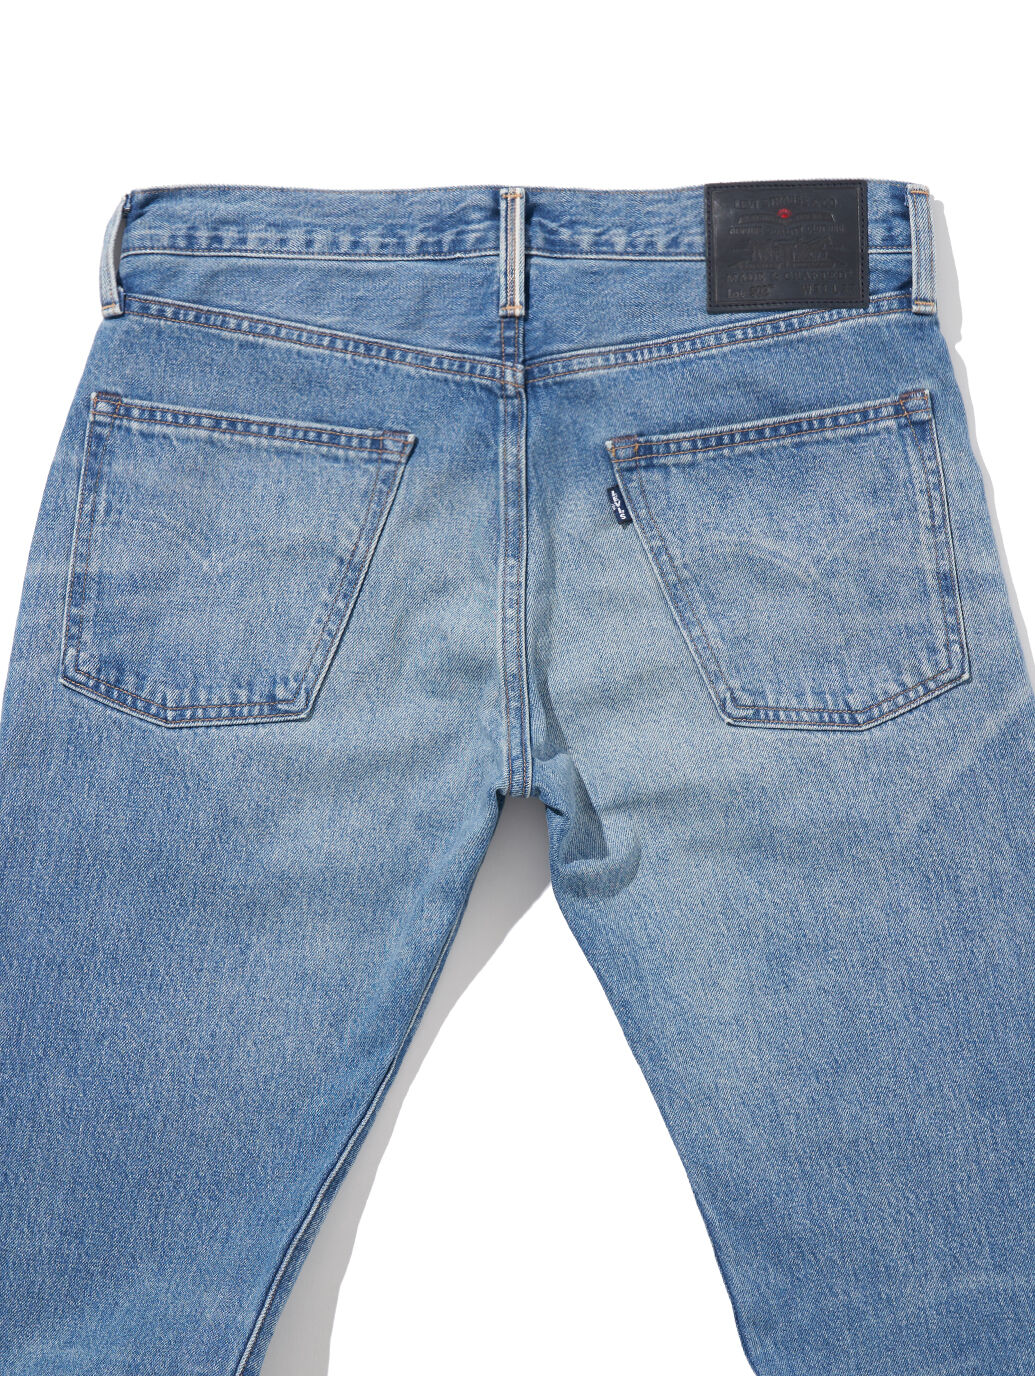 LEVI'S® MADE&CRAFTED®502™ テーパー MADE IN JAPAN｜リーバイス® 公式通販